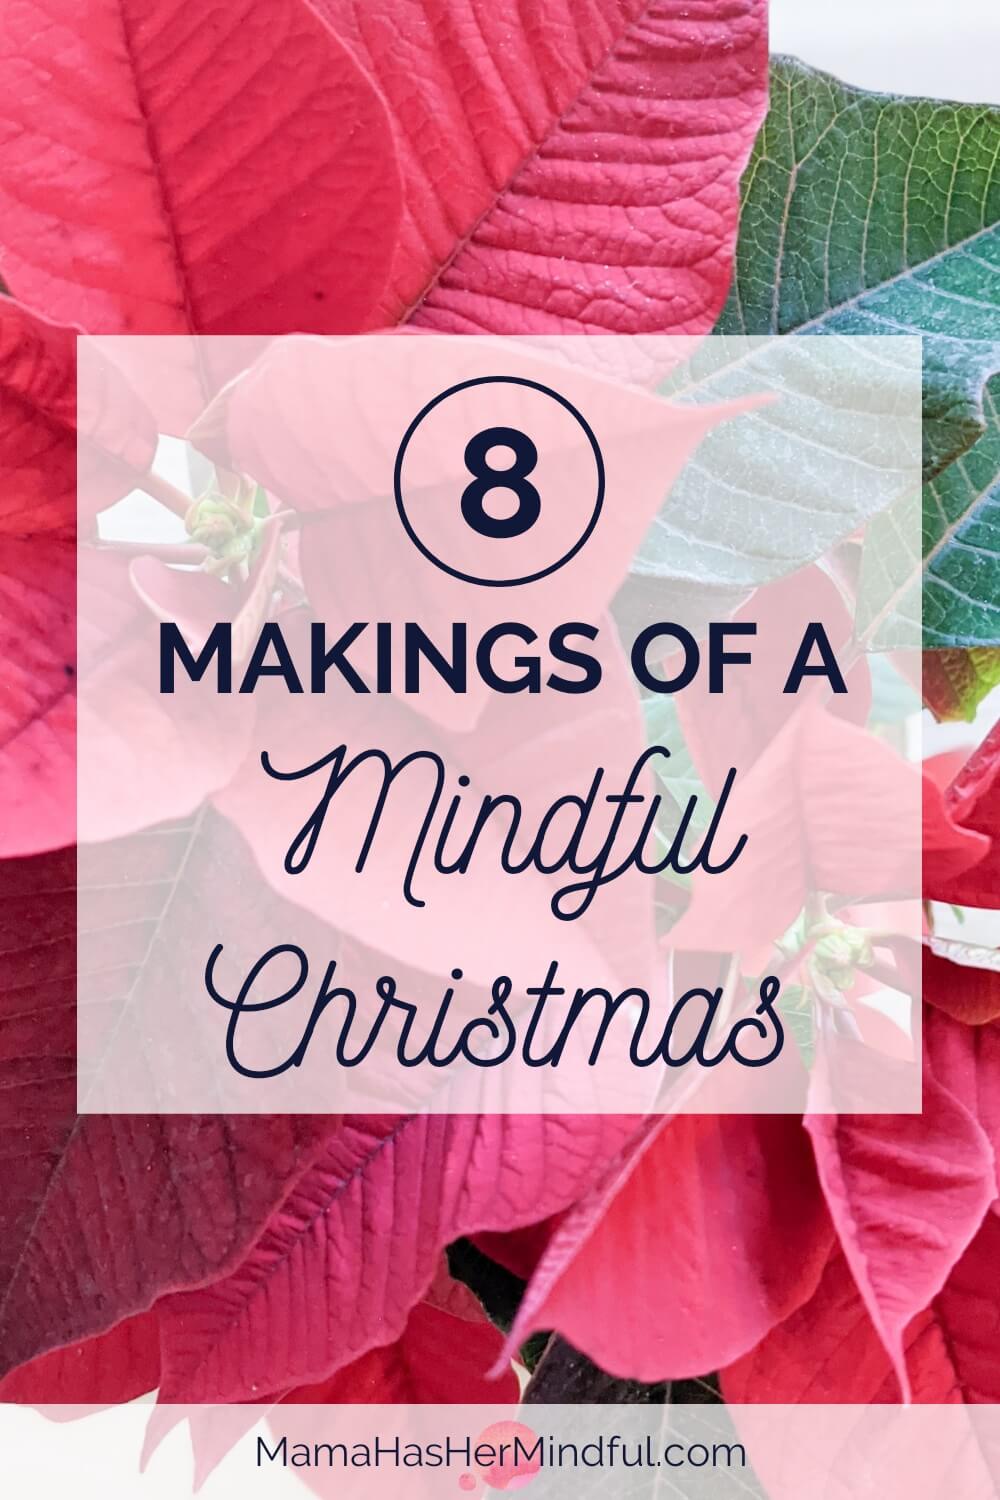 8 Makings of a Merry (and Mindful) Christmas